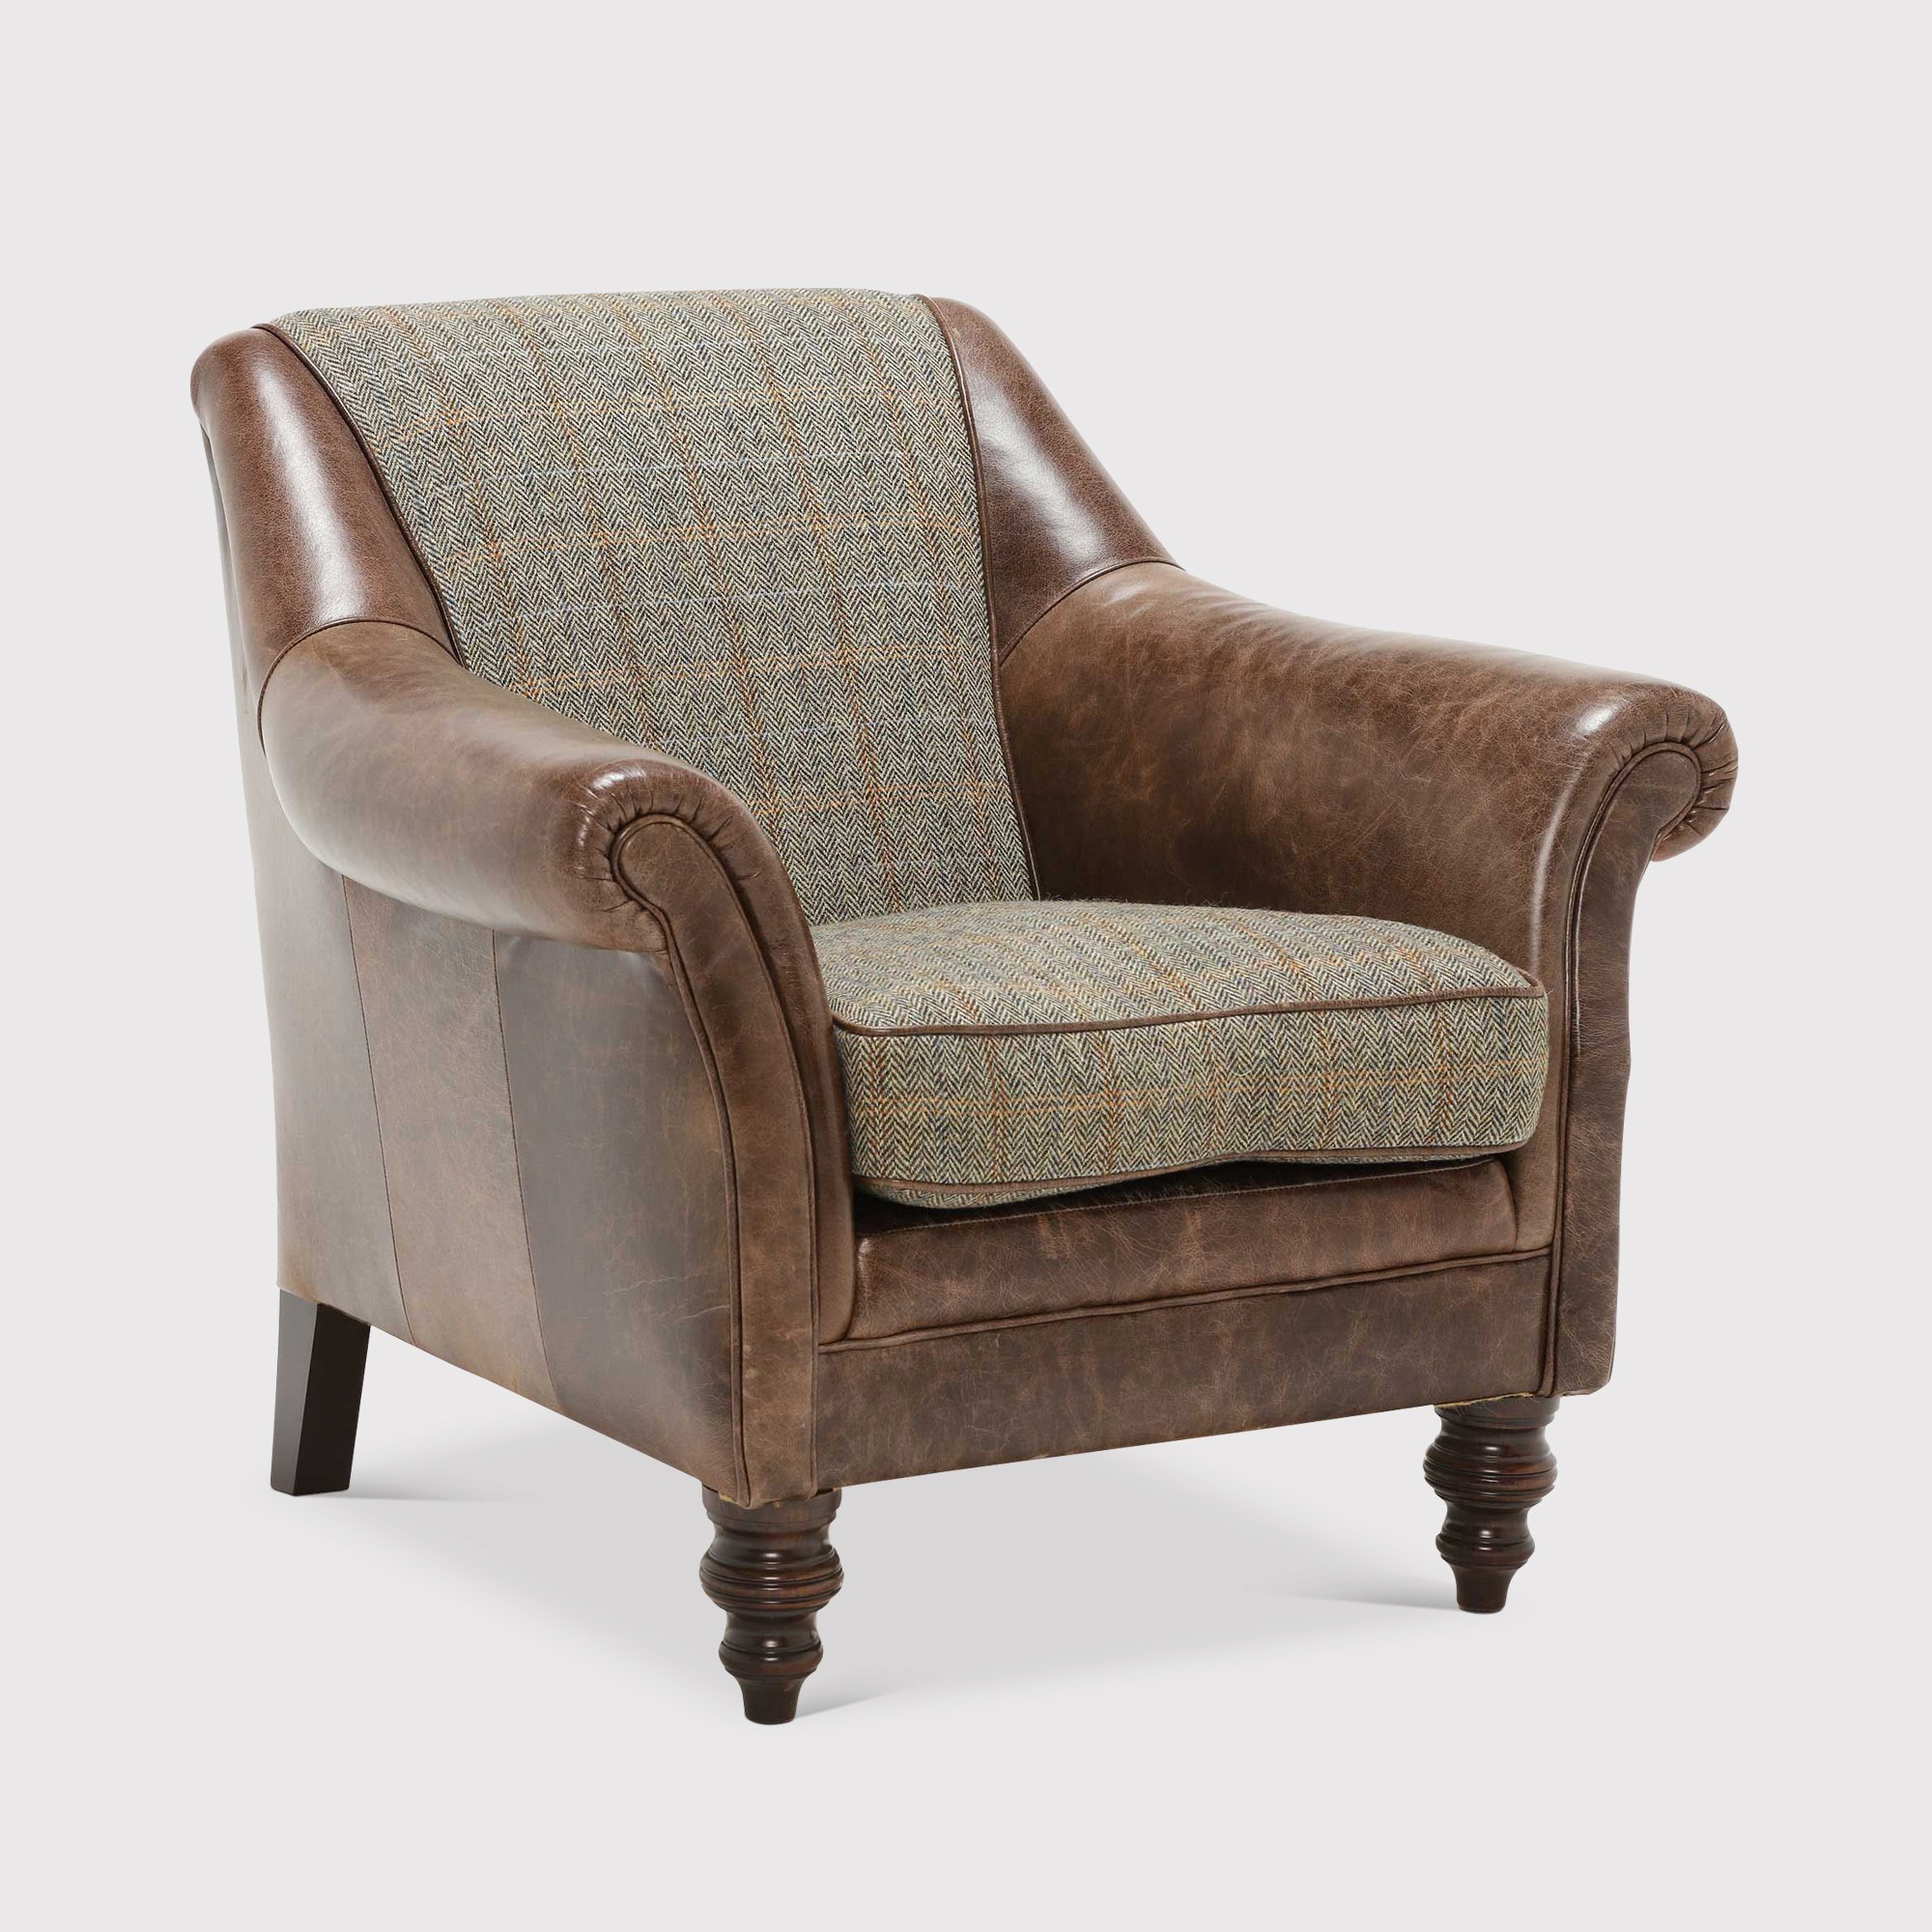 Tetrad Harris Tweed Dalmore Accent Chair, Brown Fabric | Barker & Stonehouse